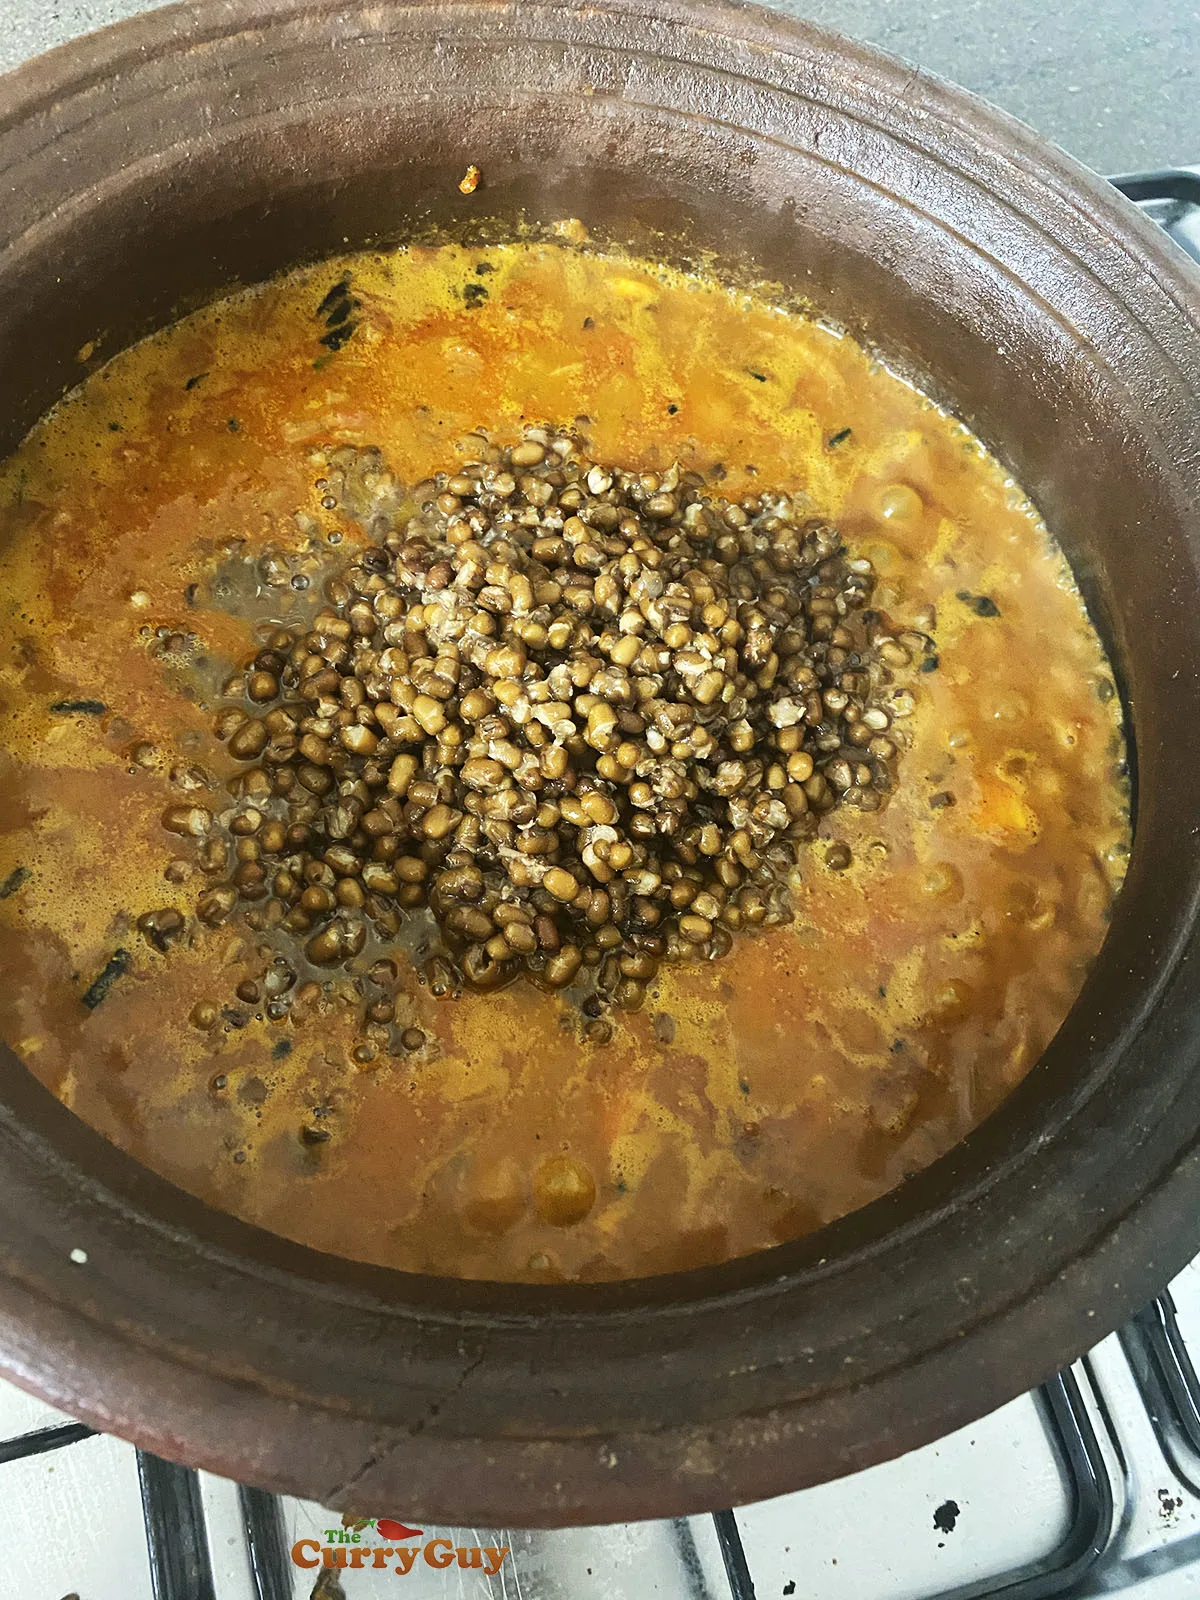 Adding lentils to the pan